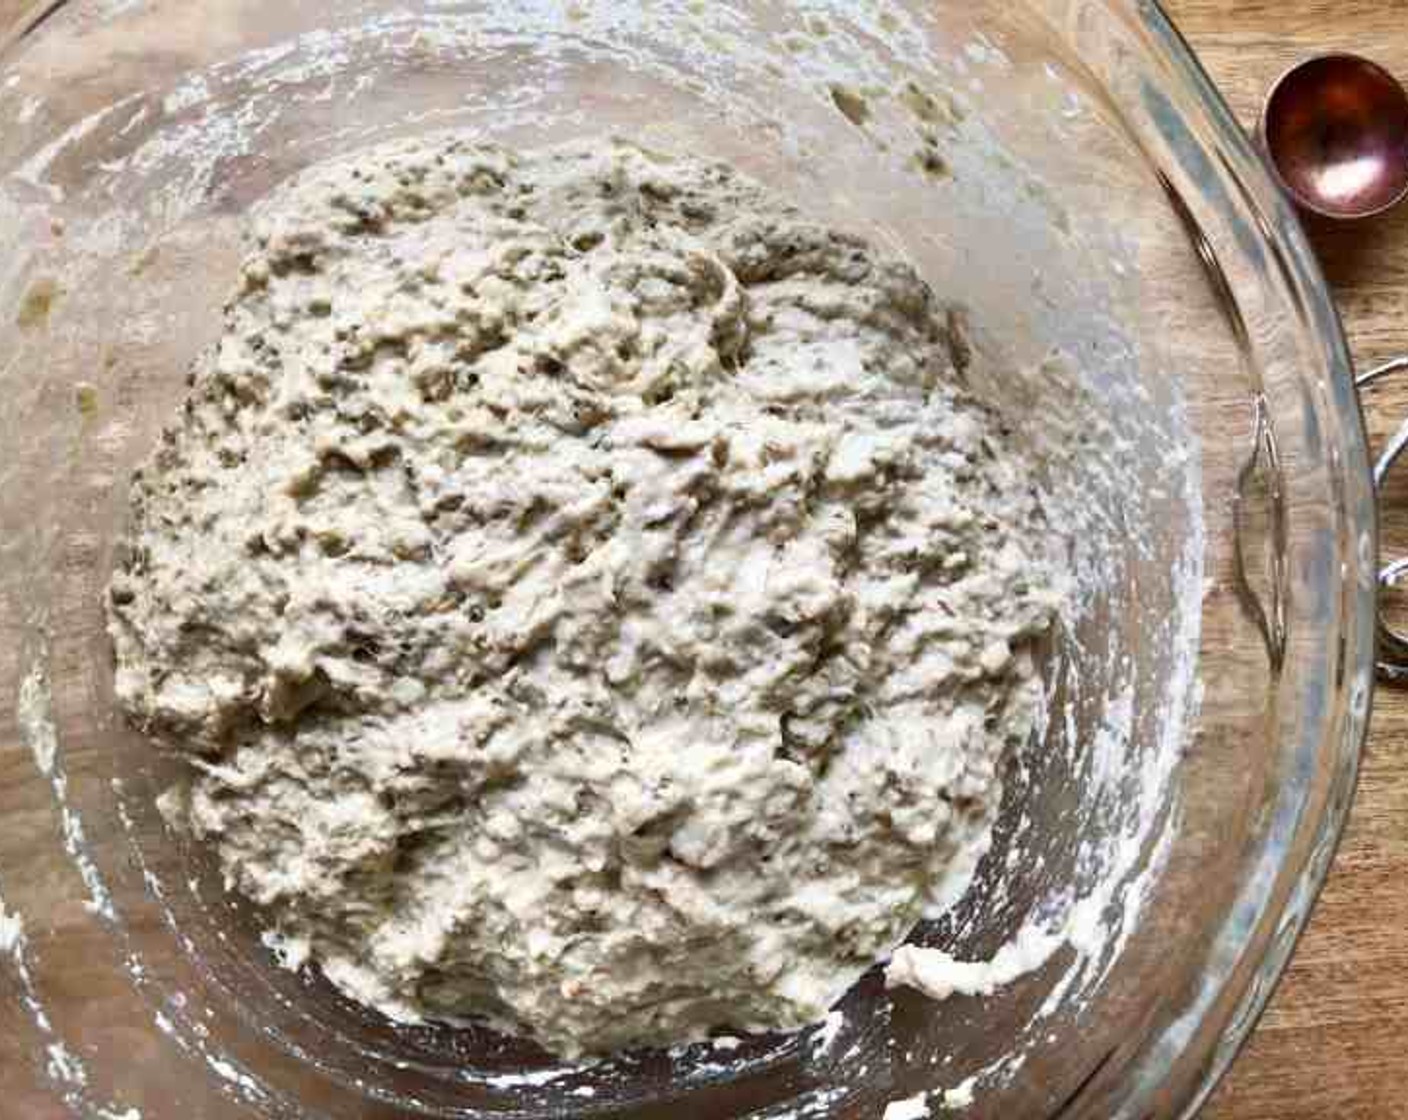 step 3 Add Rye Flour (1 cup) and All-Purpose Flour (5 1/2 cups) to the water mixture all at once, then use a spoon or dough whisk to mix until the flour is completely incorporated and you have a lumpy dough.